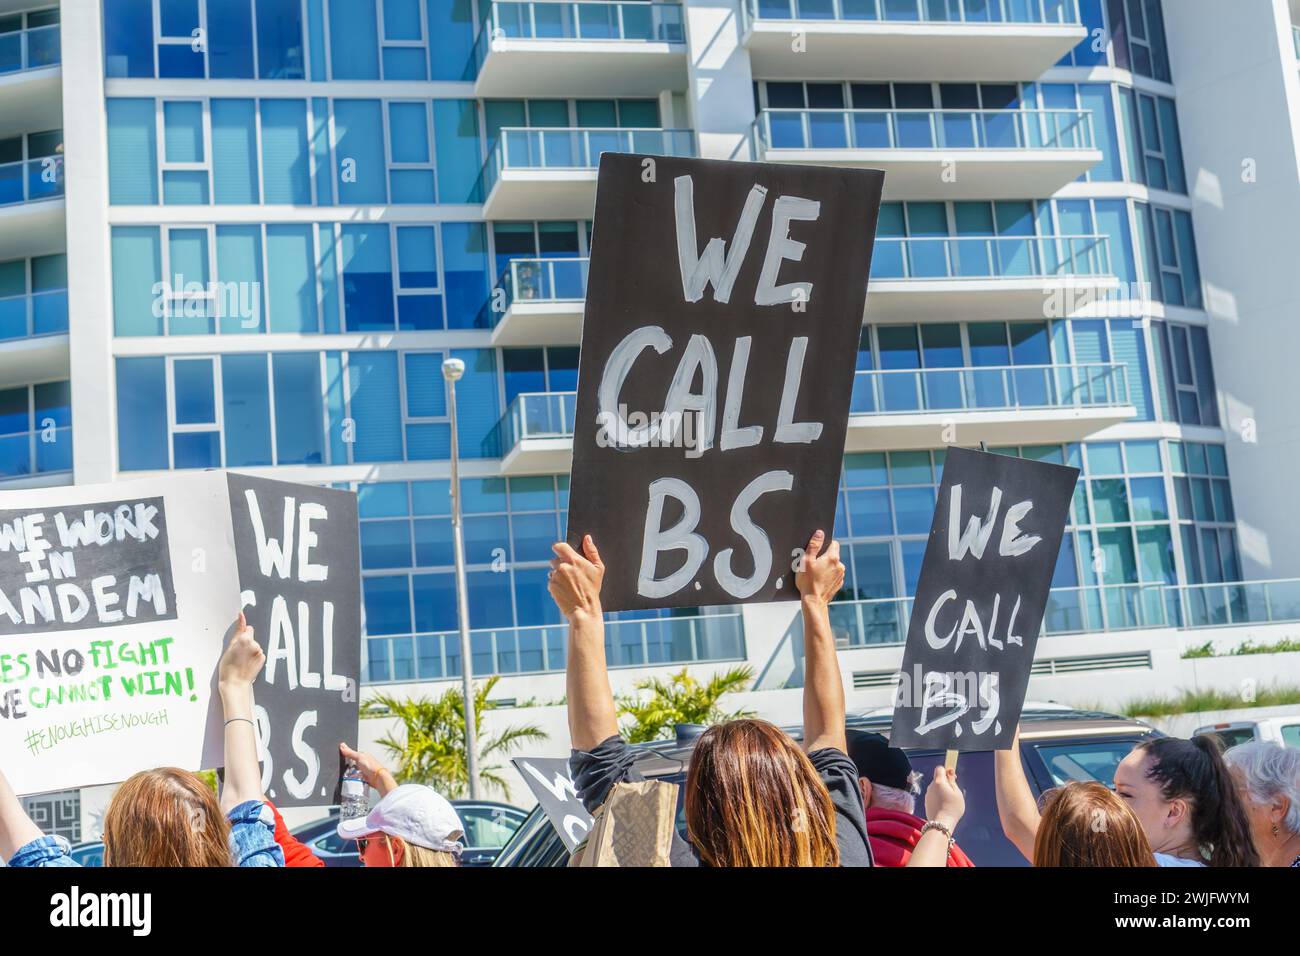 Sarasota, FL, US -March 24, 2018 - Protesters gather at the student-led protest March For Our Lives holding sign reading 'We Call BS' Stock Photo